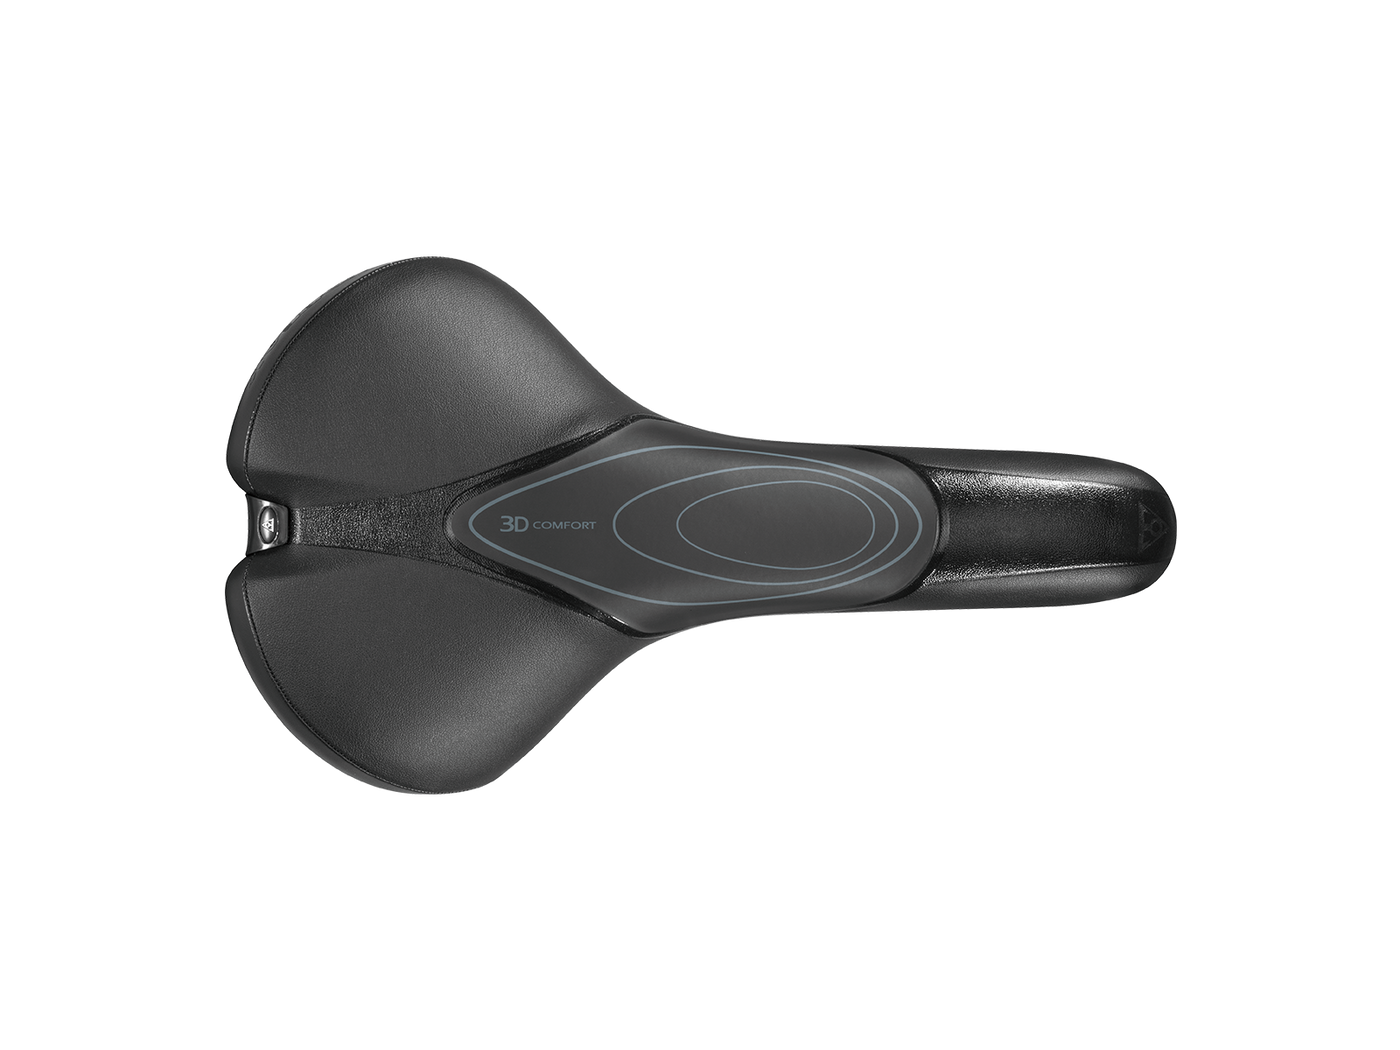 Topeak Free RX 3D Comfort Saddle - Cyclop.in